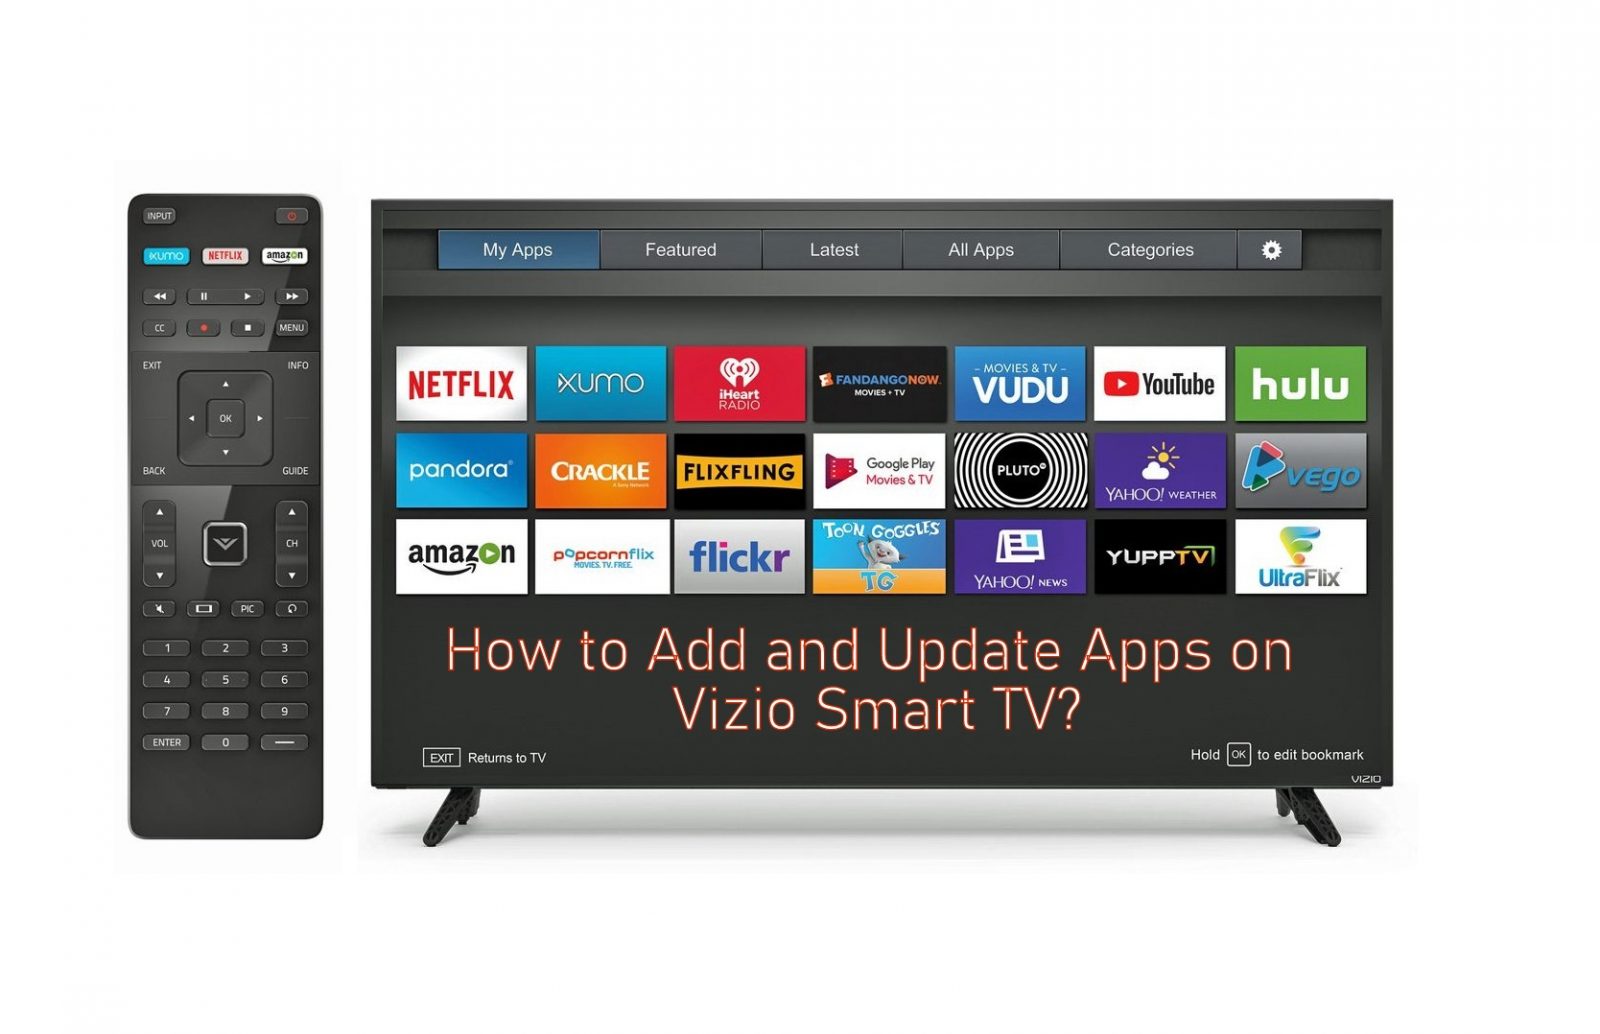 How to Add and Update Apps on Vizio Smart TV